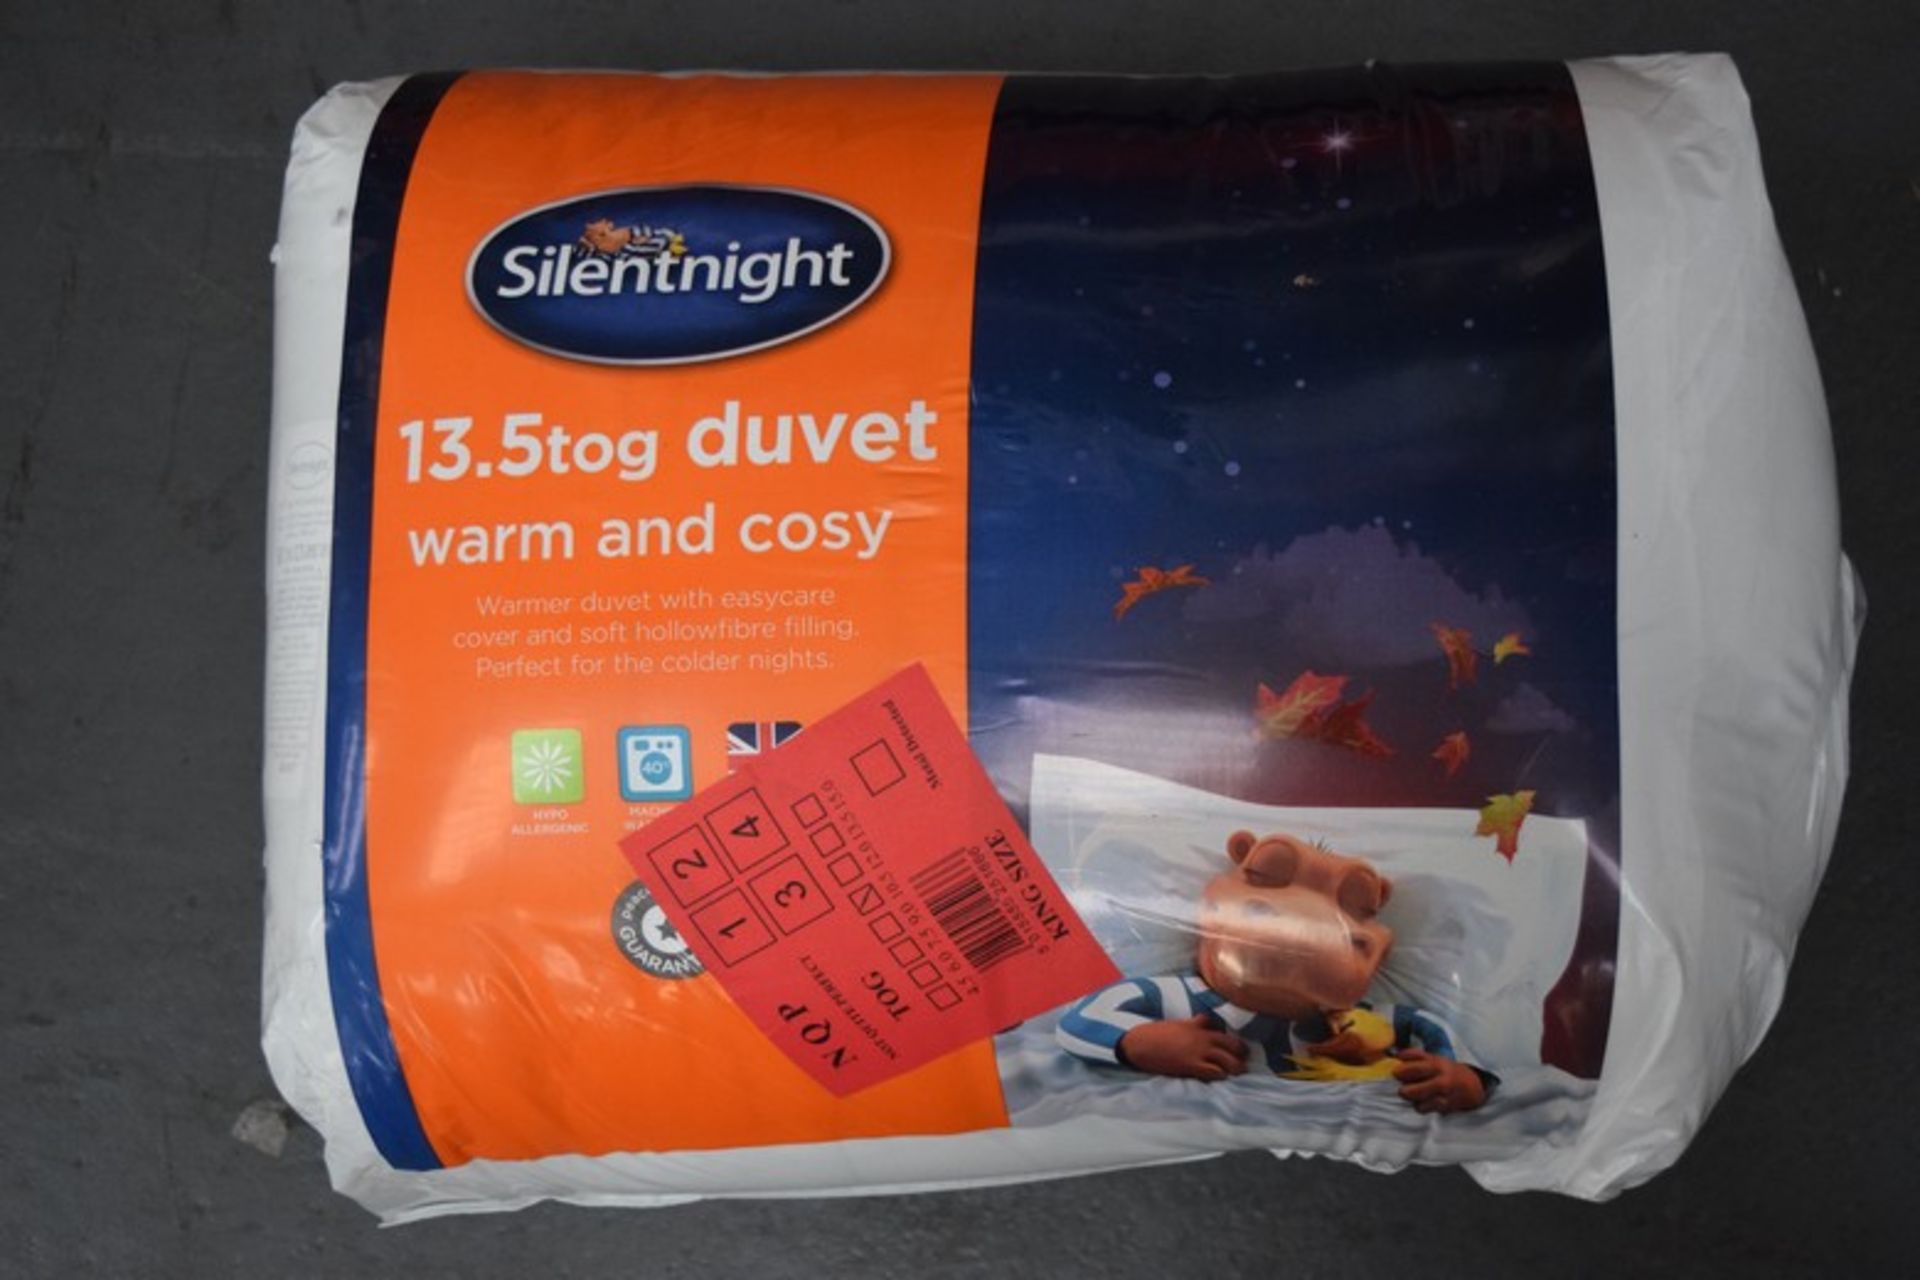 1 X BAGGED BRAND NEW SILENT NIGHT WARM AND COSY KING SIZE DUVET RRP £30 (TW)